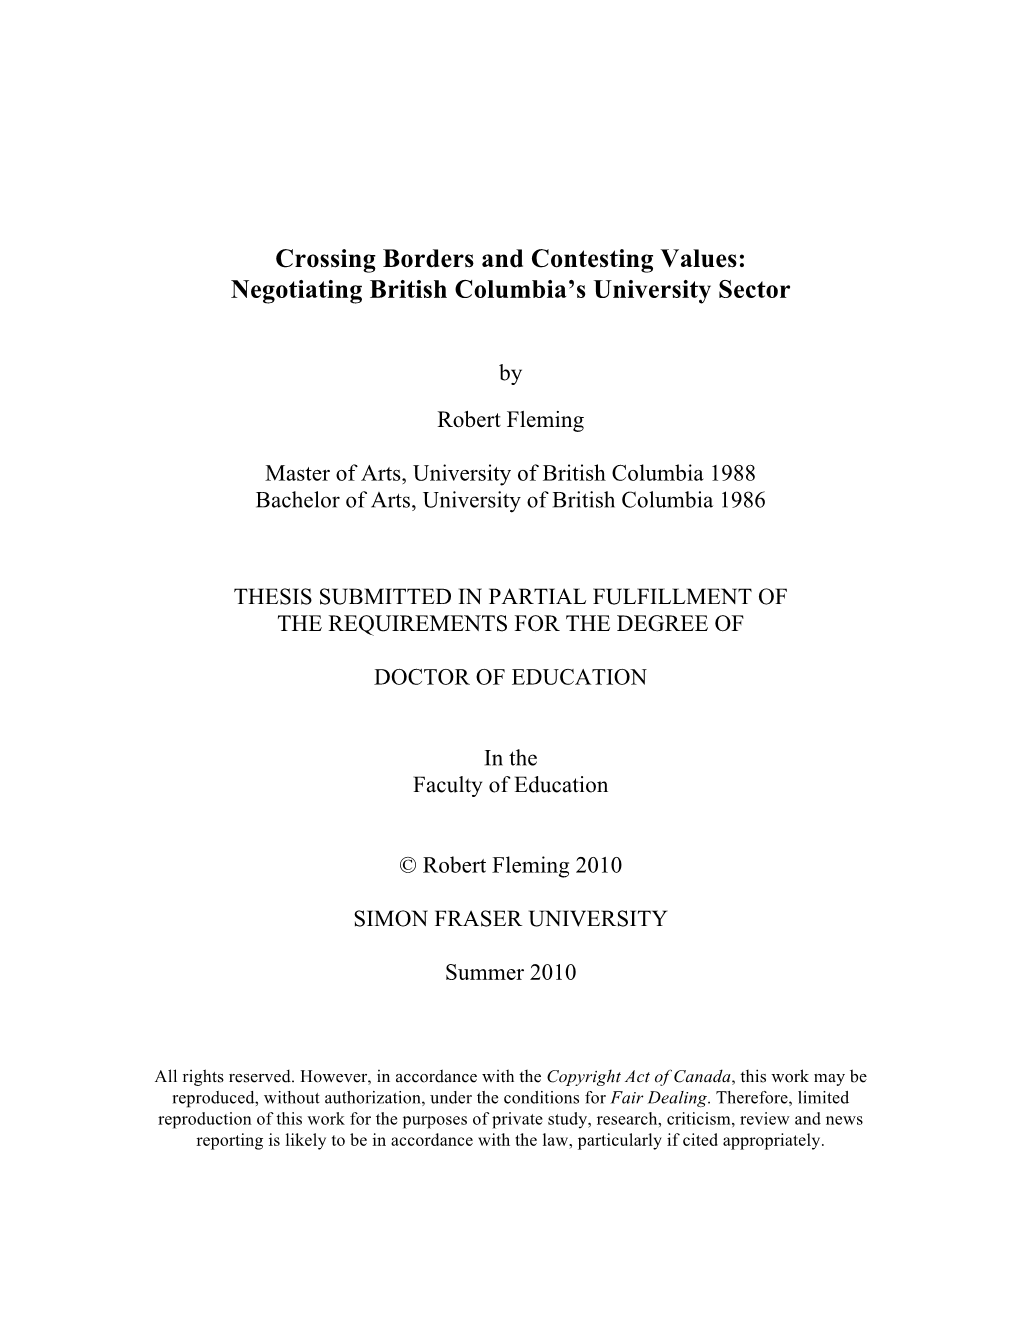 Crossing Borders and Contesting Values: Negotiating British Columbia’S University Sector